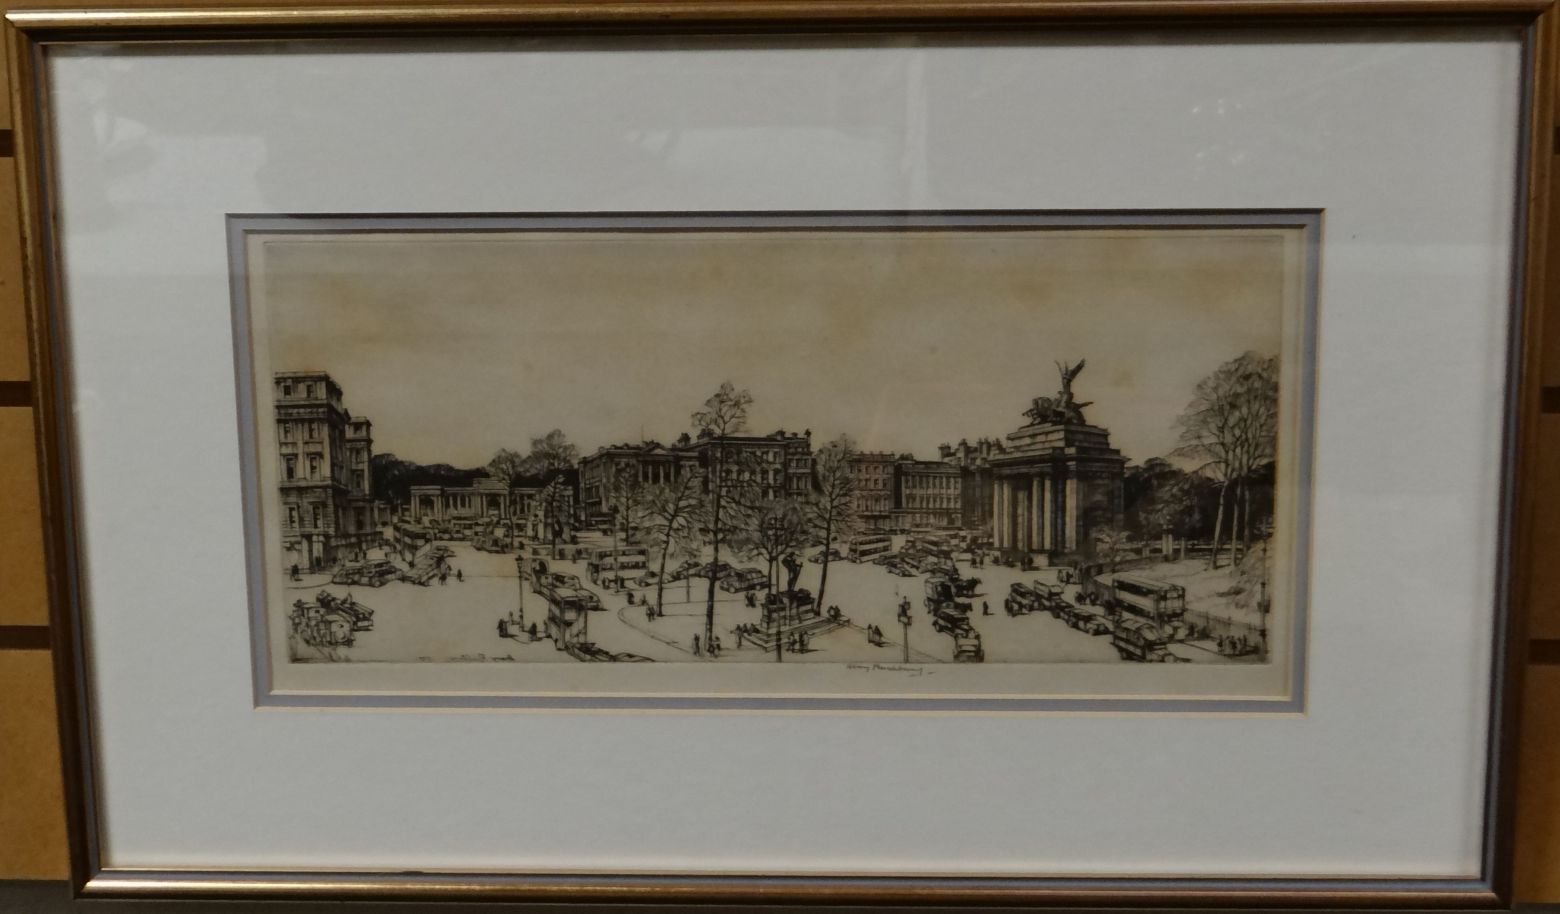 HENRY RUSHBURY monochrome print of busy London at 'Constitution Hill, 1947' with the Wellington Arch